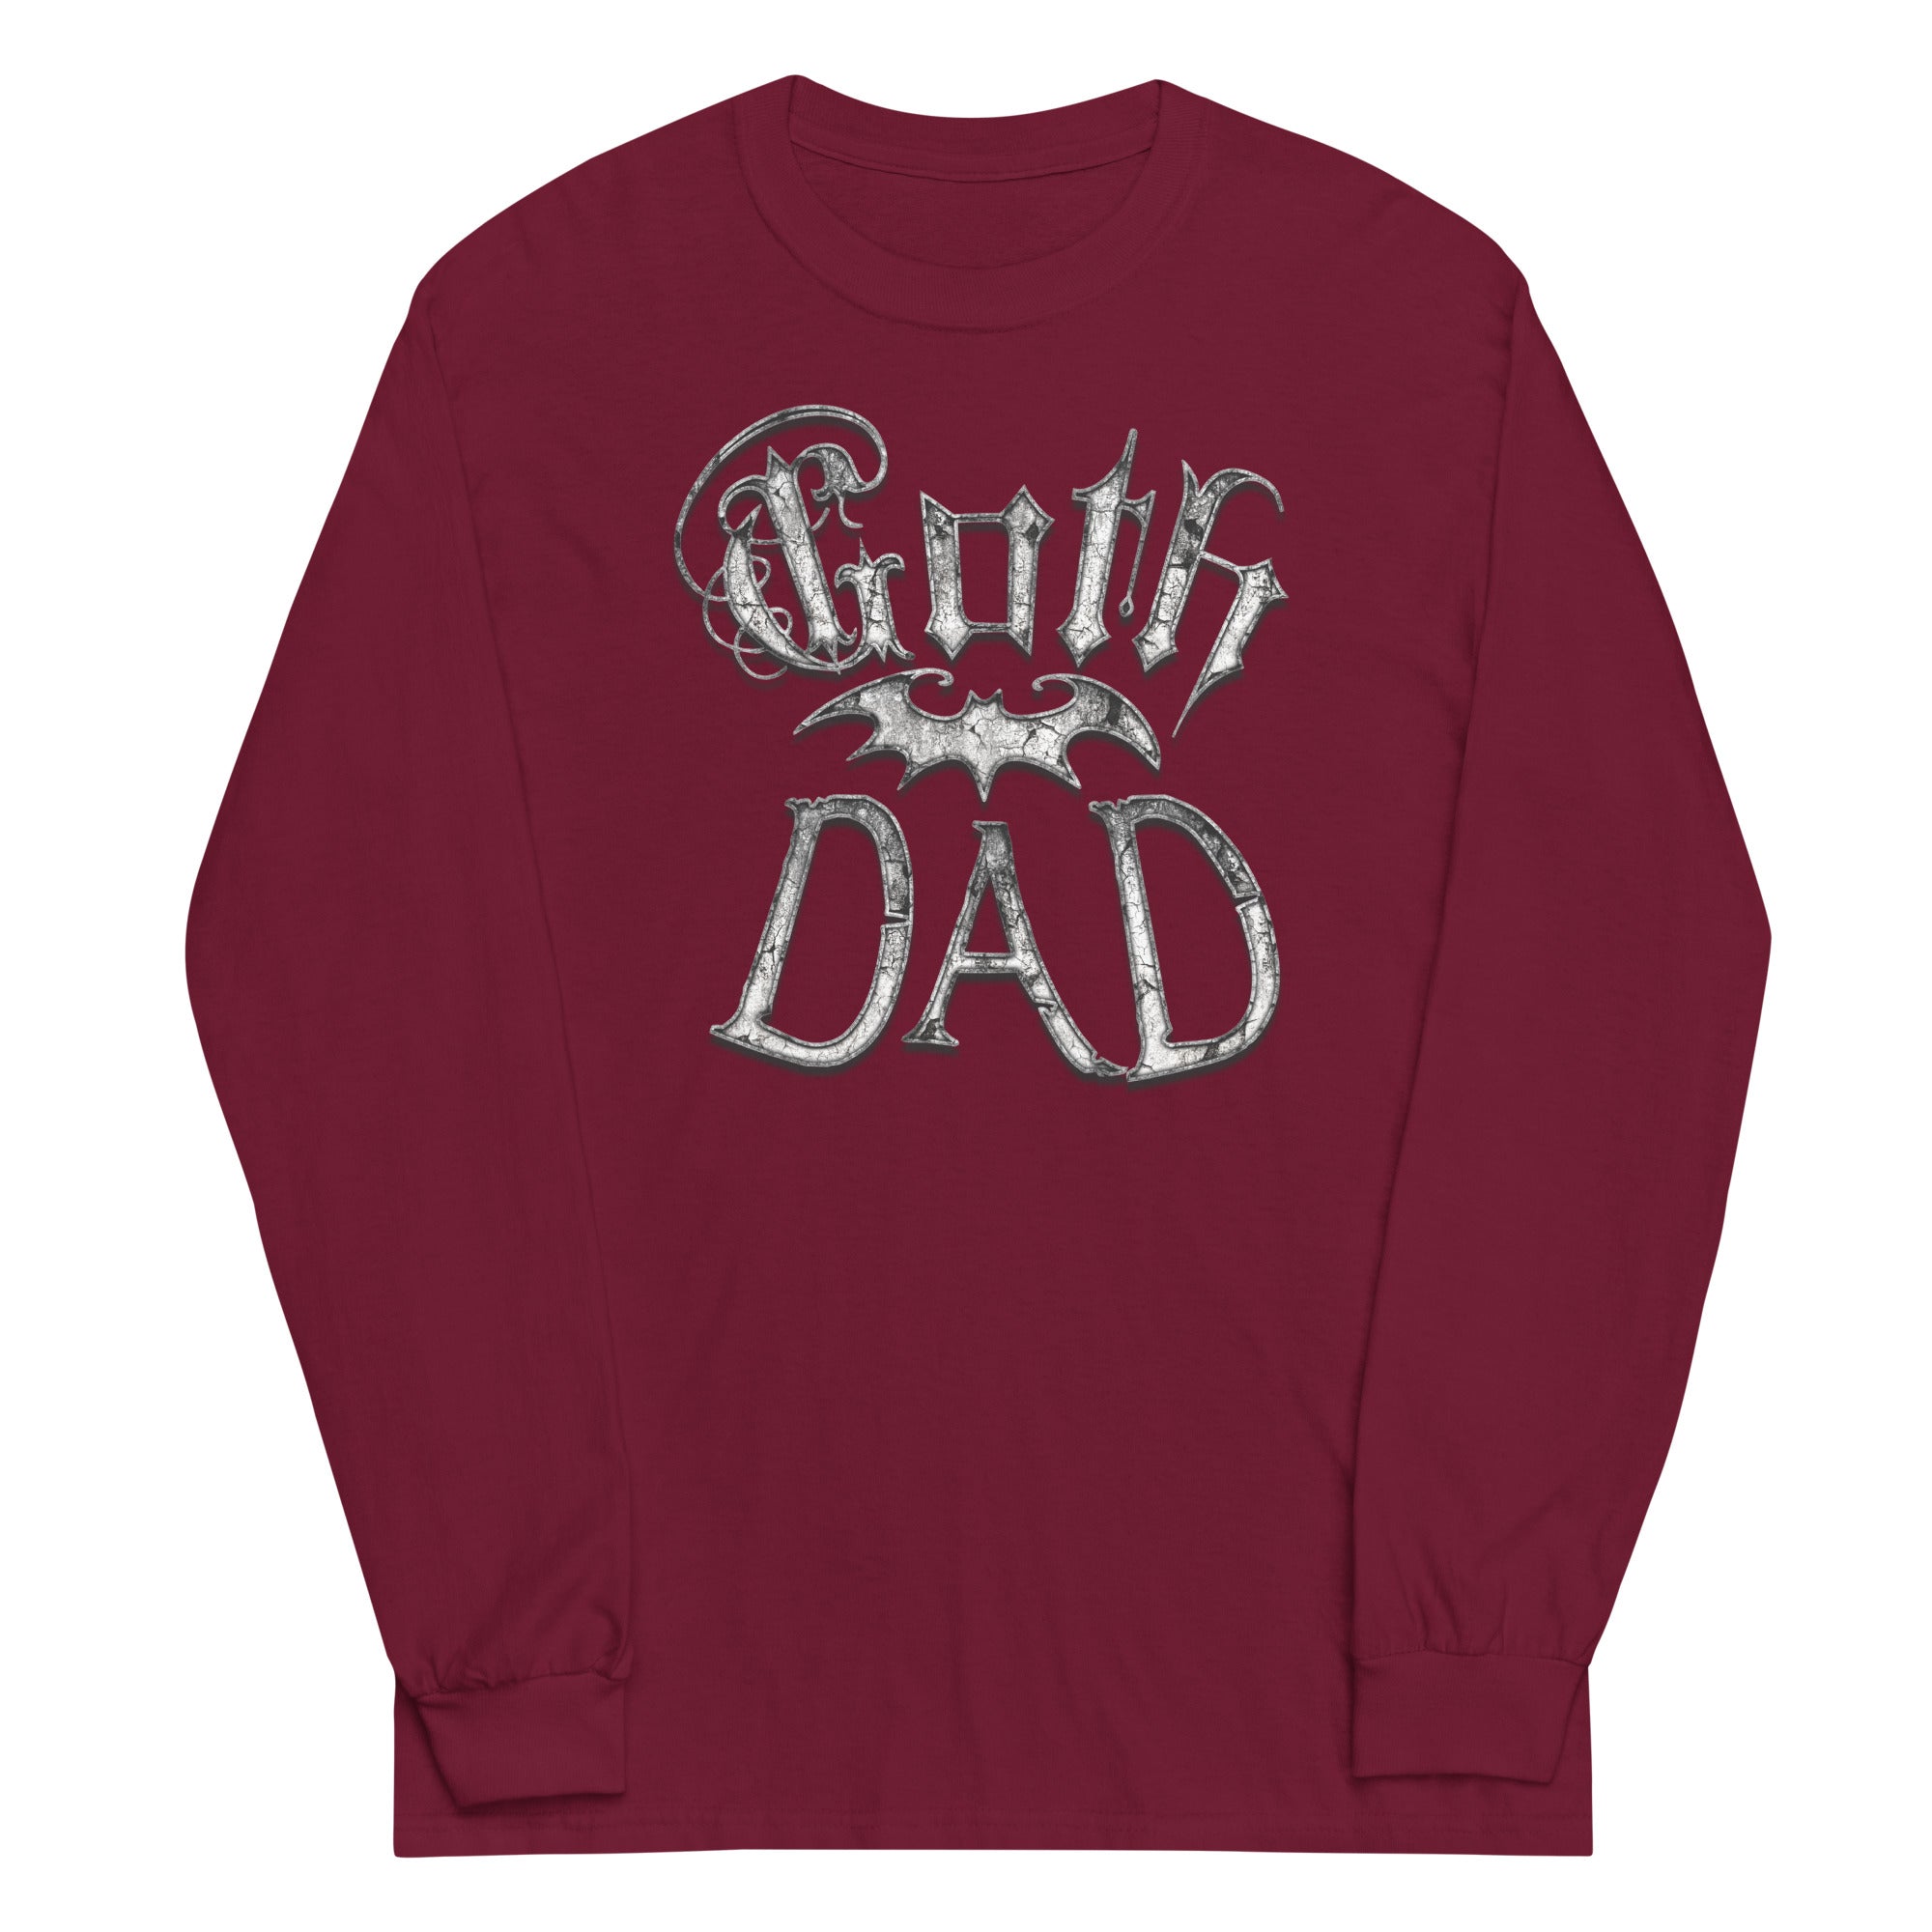 White Goth Dad with Bat Father's Day Gift Men’s Long Sleeve Shirt